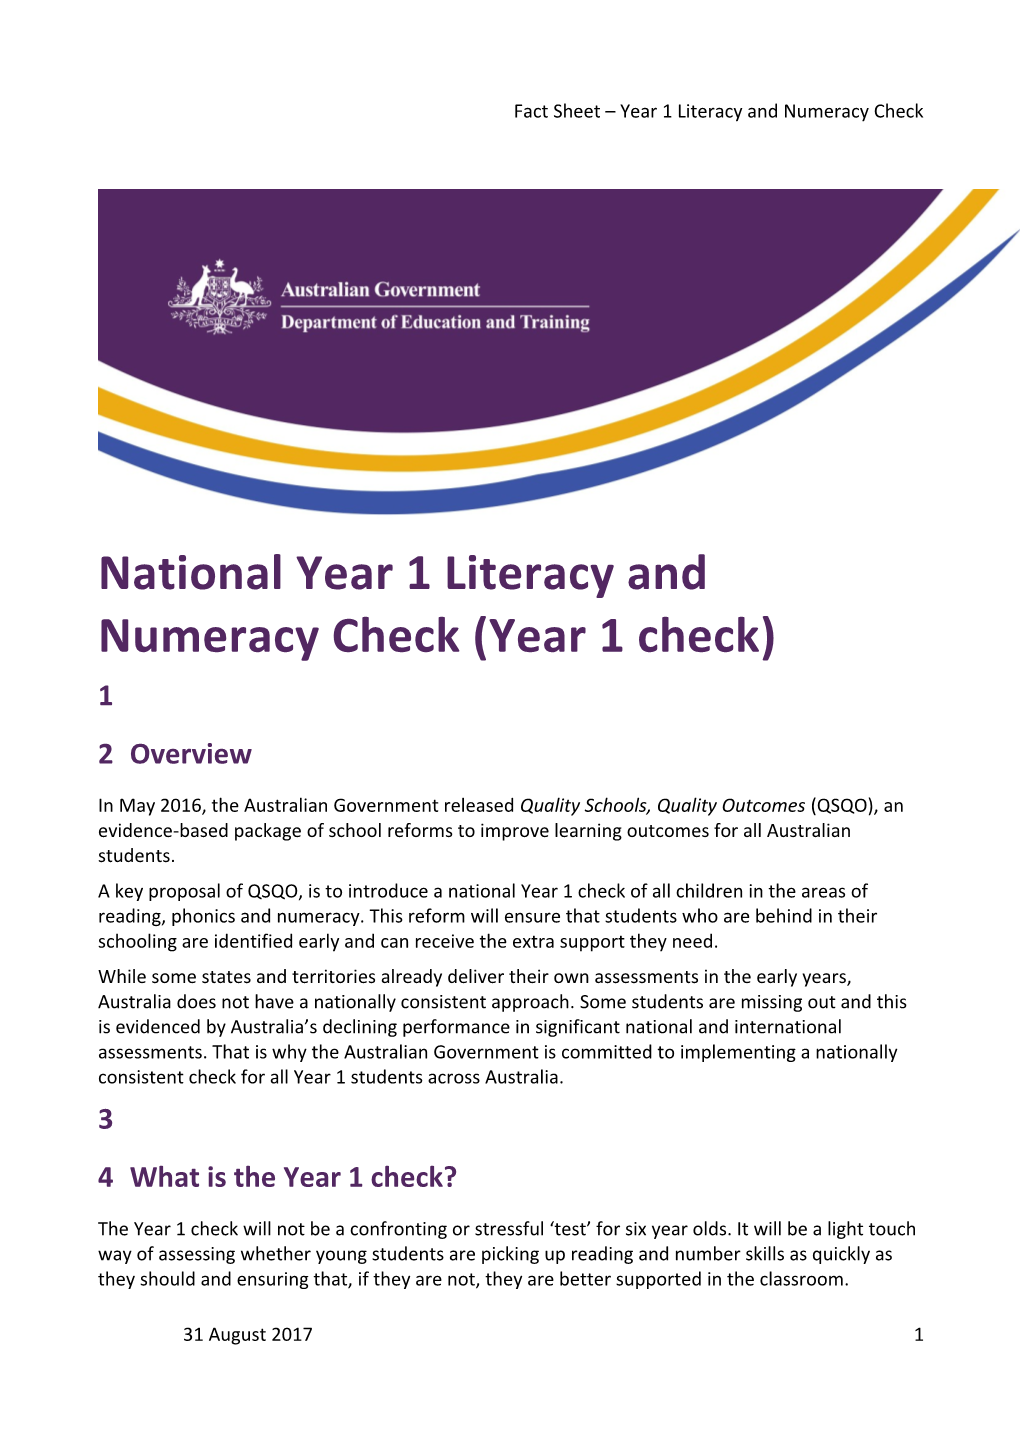 National Year 1 Literacy and Numeracy Check (Year 1 Check)